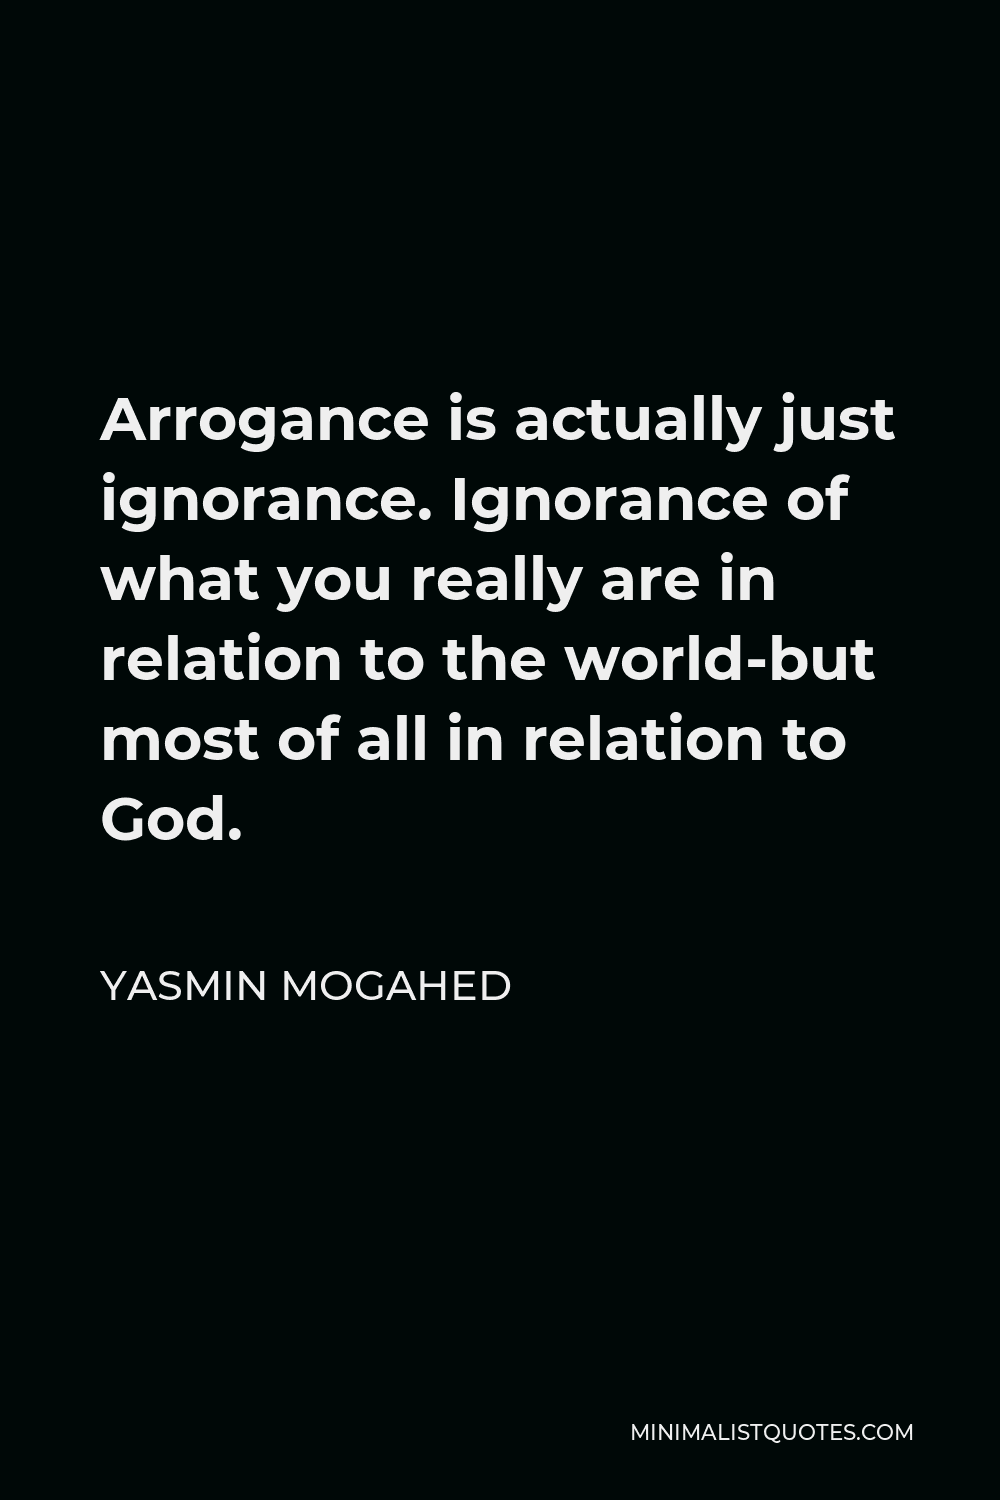 Yasmin Mogahed Quote - Arrogance is actually just ignorance. Ignorance of what you really are in relation to the world-but most of all in relation to God.